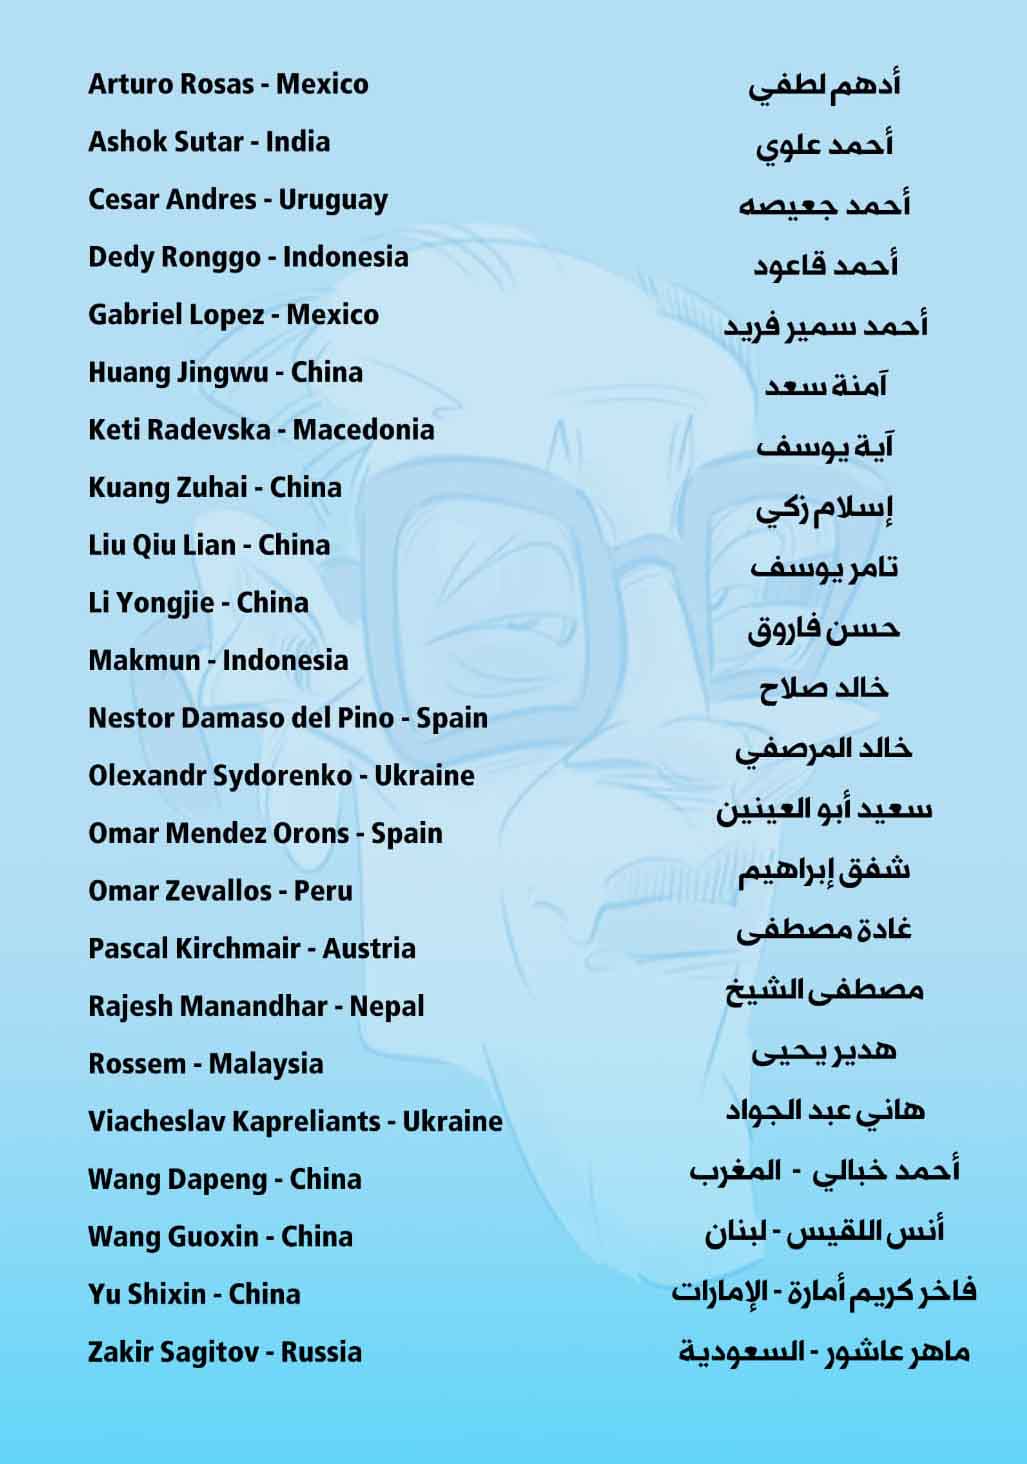 Participants of the international caricature exhibition about "Naguib Mahfouz" in Egypt